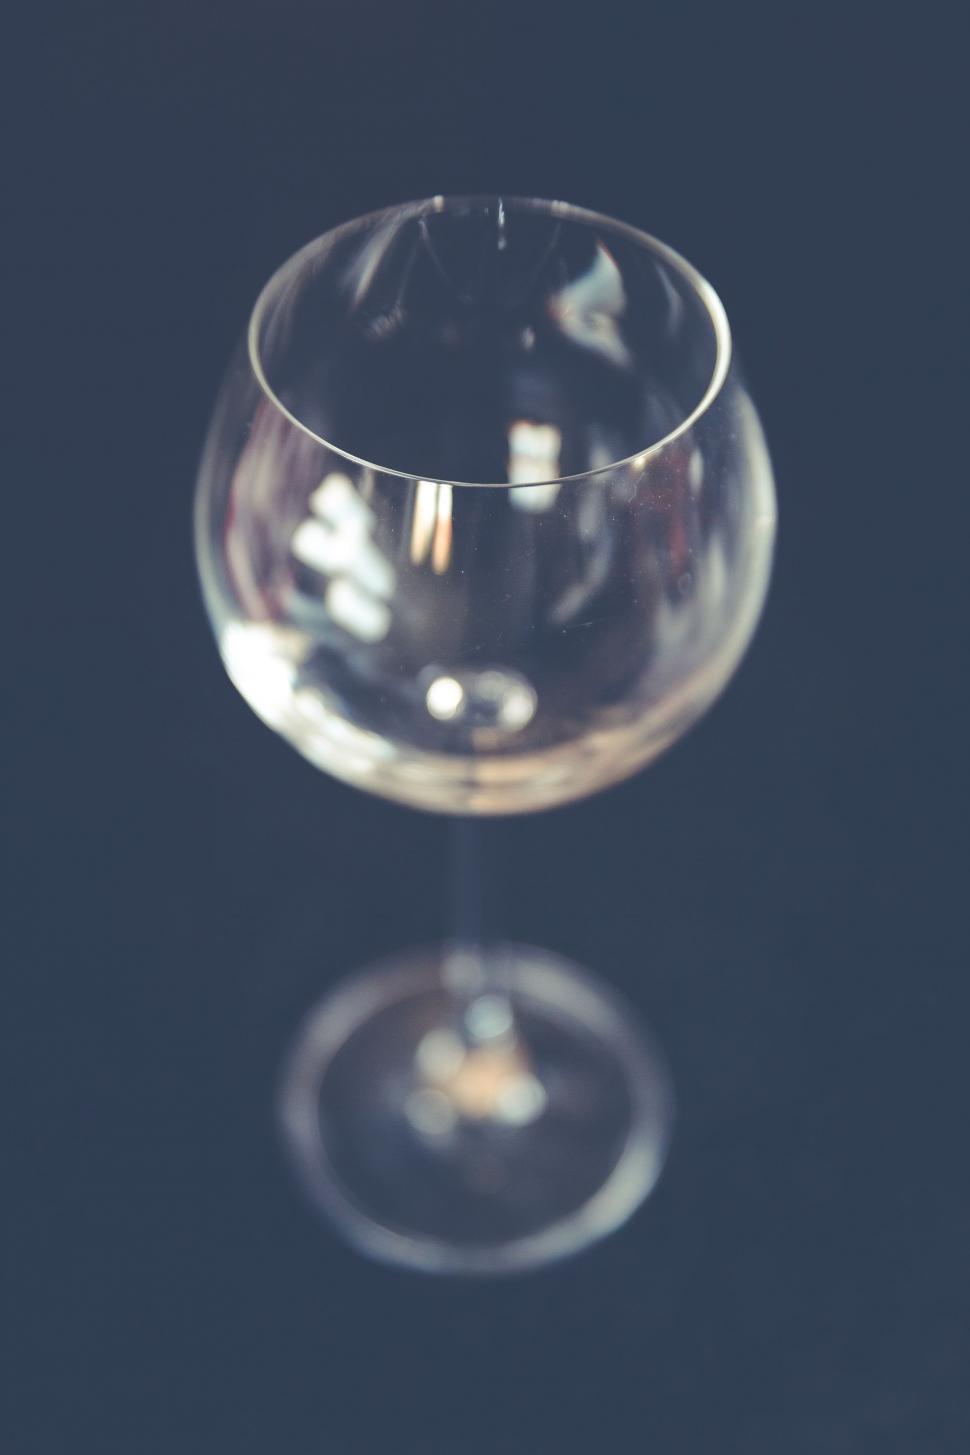 Free Image of A Wine Glass on a Table 